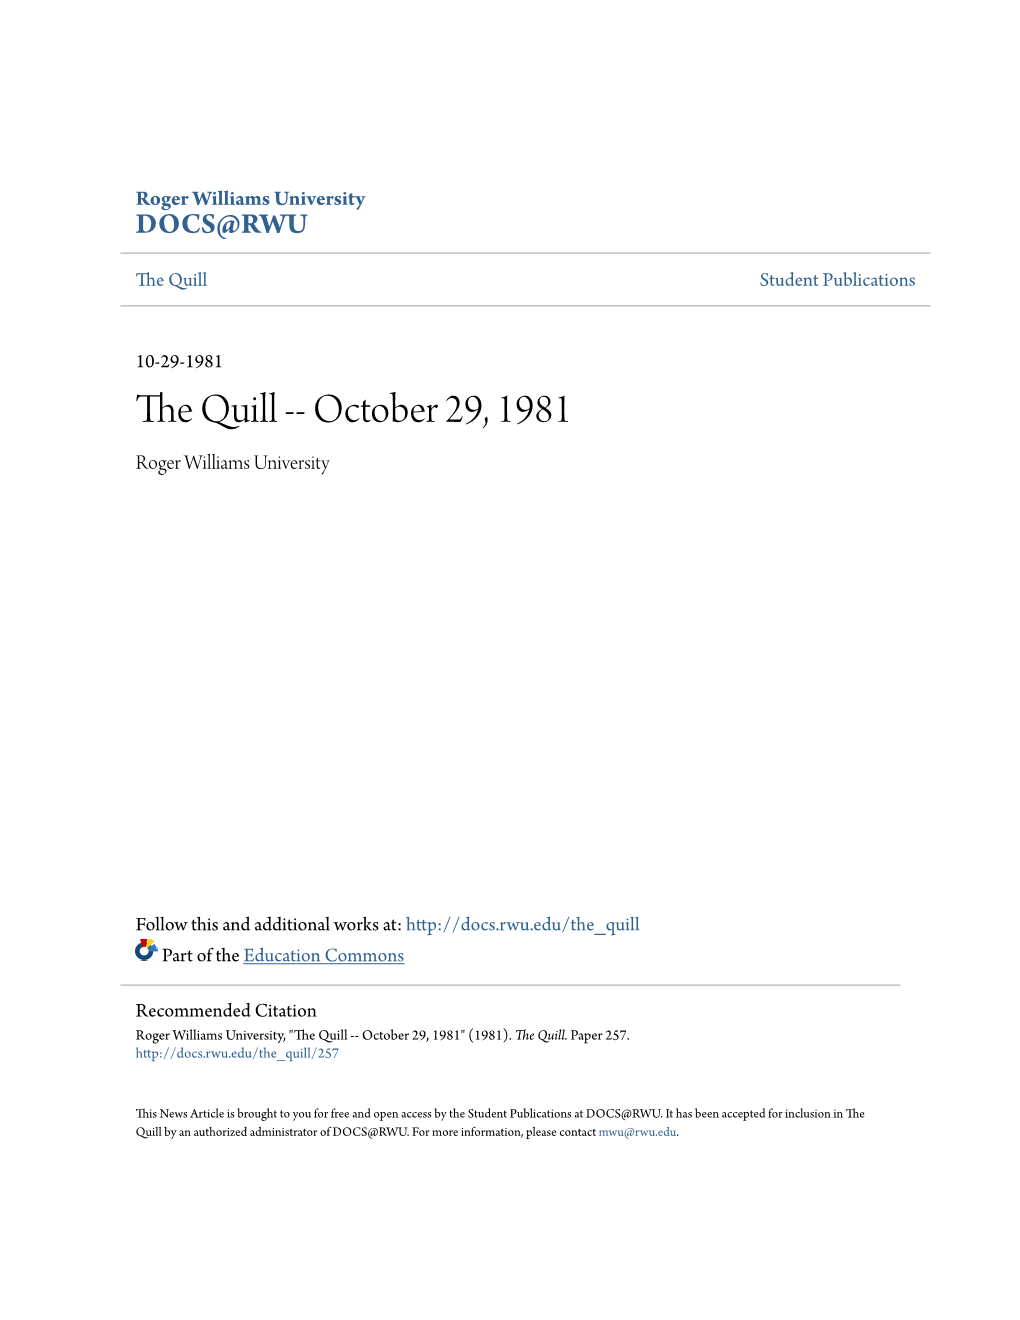 The Quill -- October 29, 1981 Roger Williams University